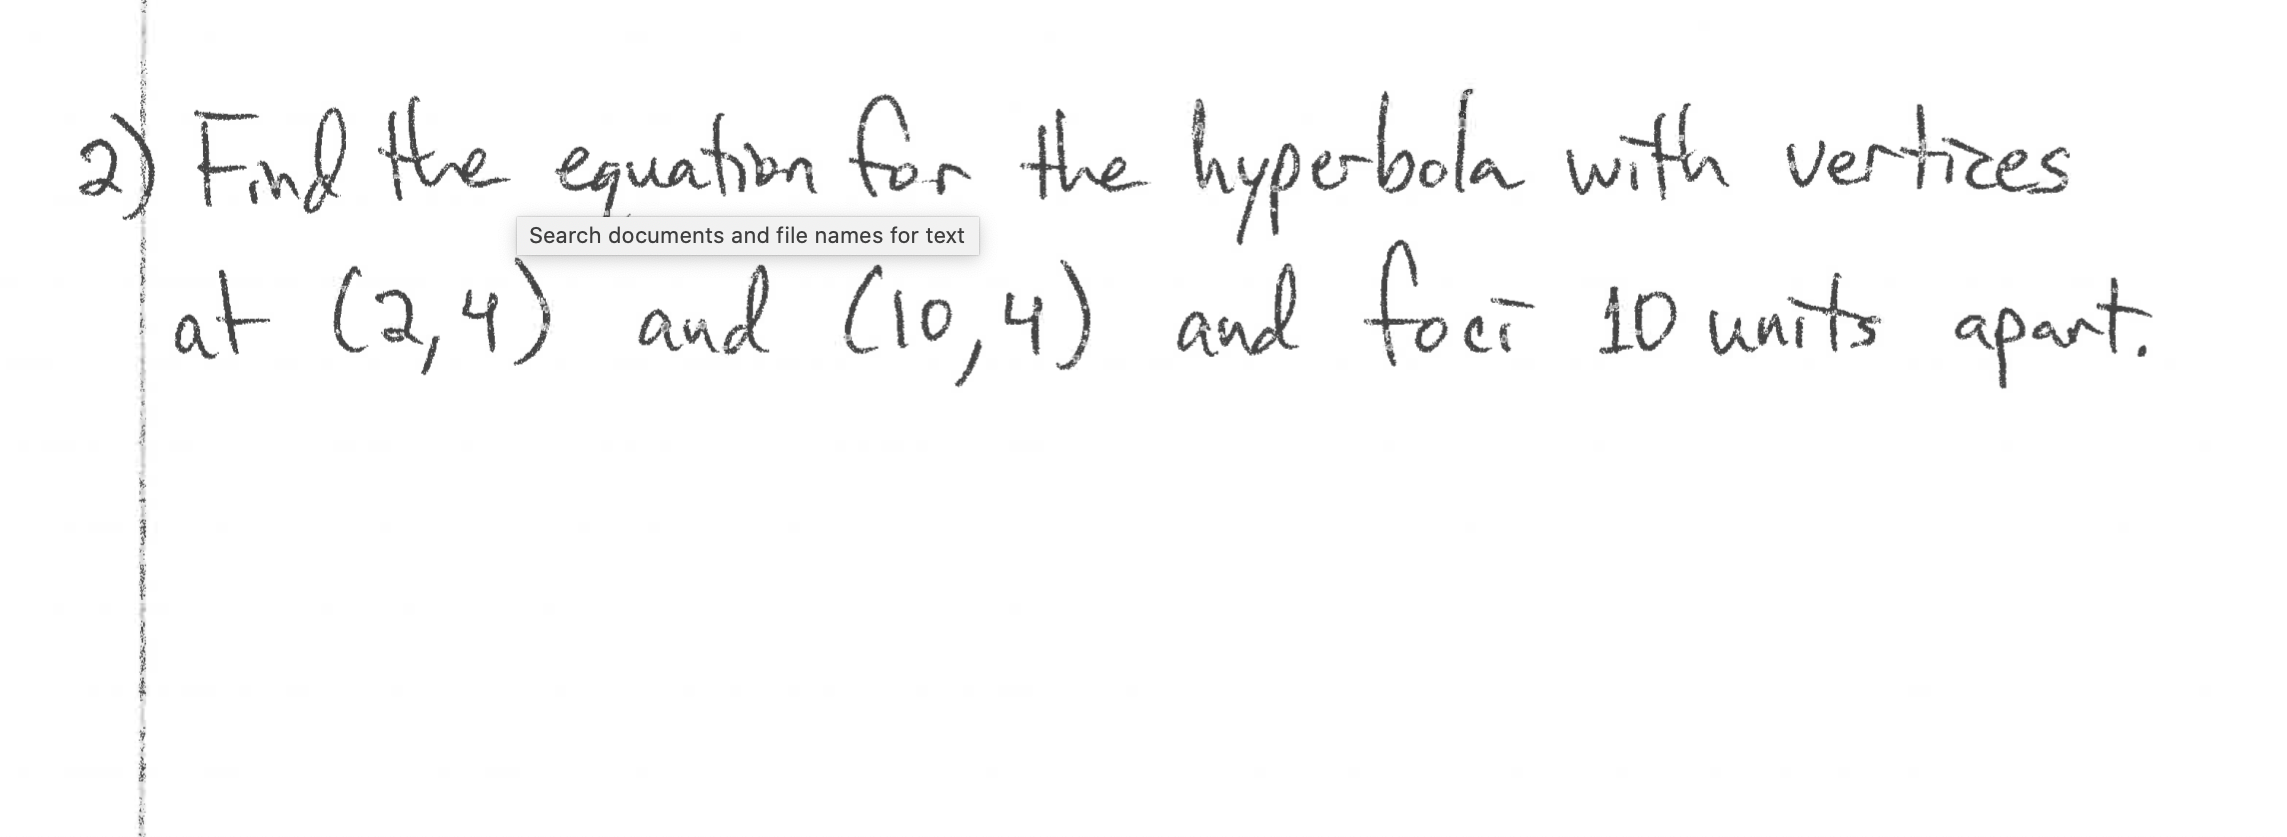 2) Finl the equation for the hyperbola with vertices
at (2,4)
Search documents and file names for text
and C10,4) and foci i0 units apant.
